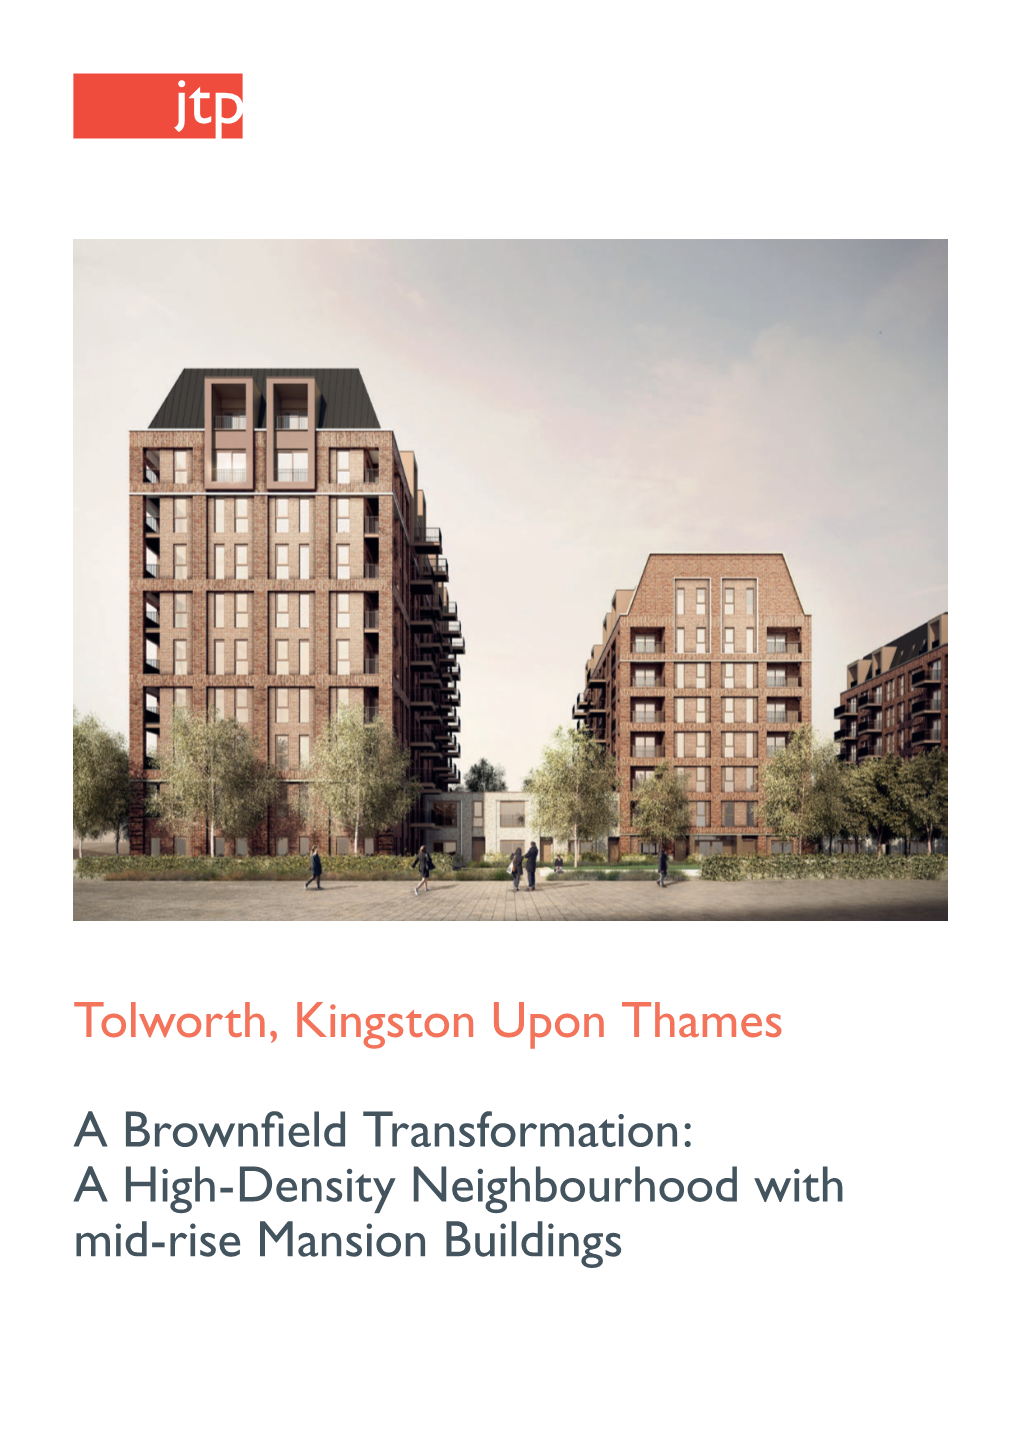 Tolworth, Kingston Upon Thames a Brownfield Transformation